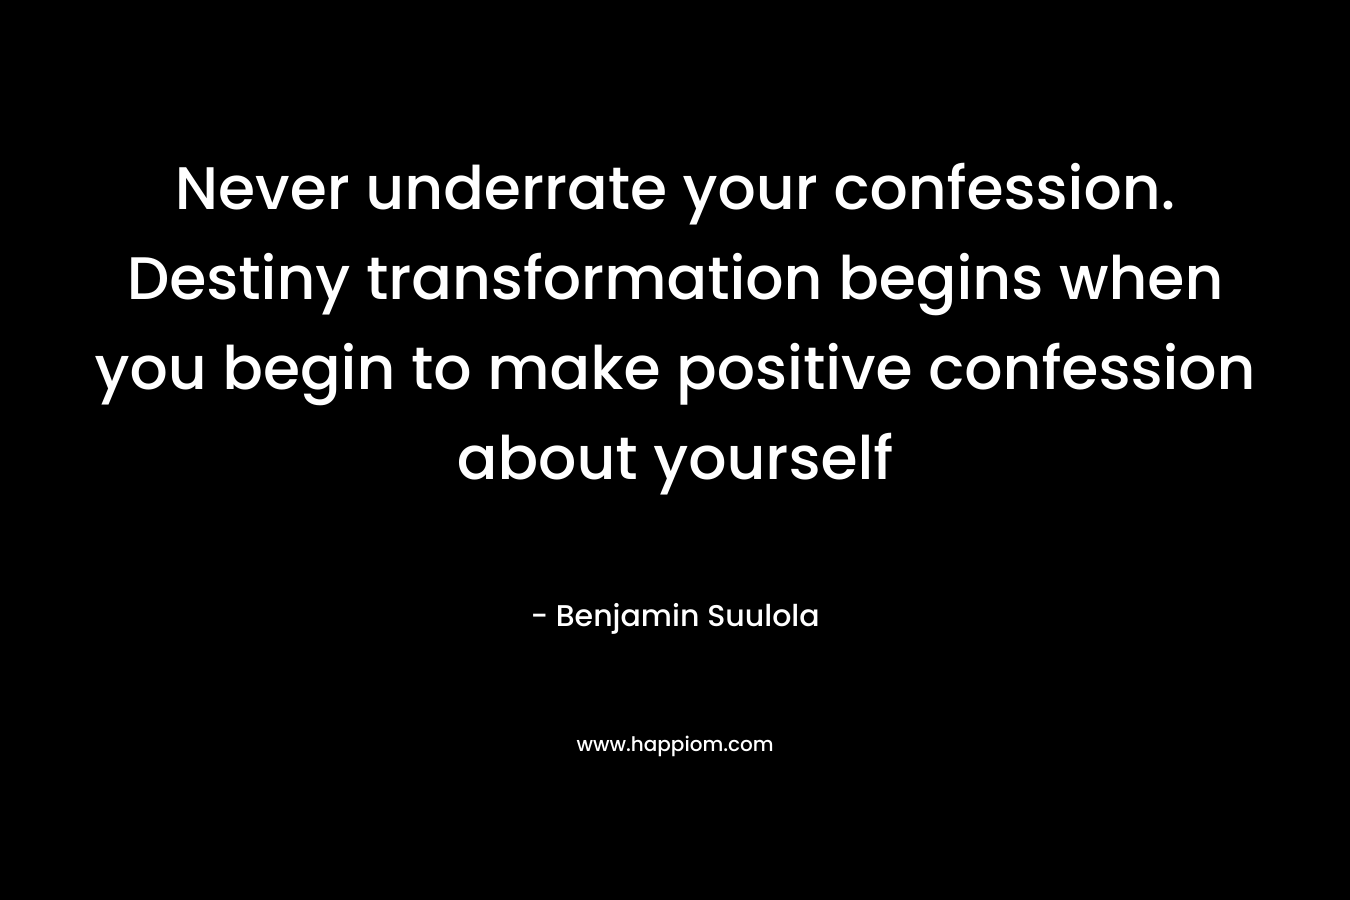 Never underrate your confession. Destiny transformation begins when you begin to make positive confession about yourself